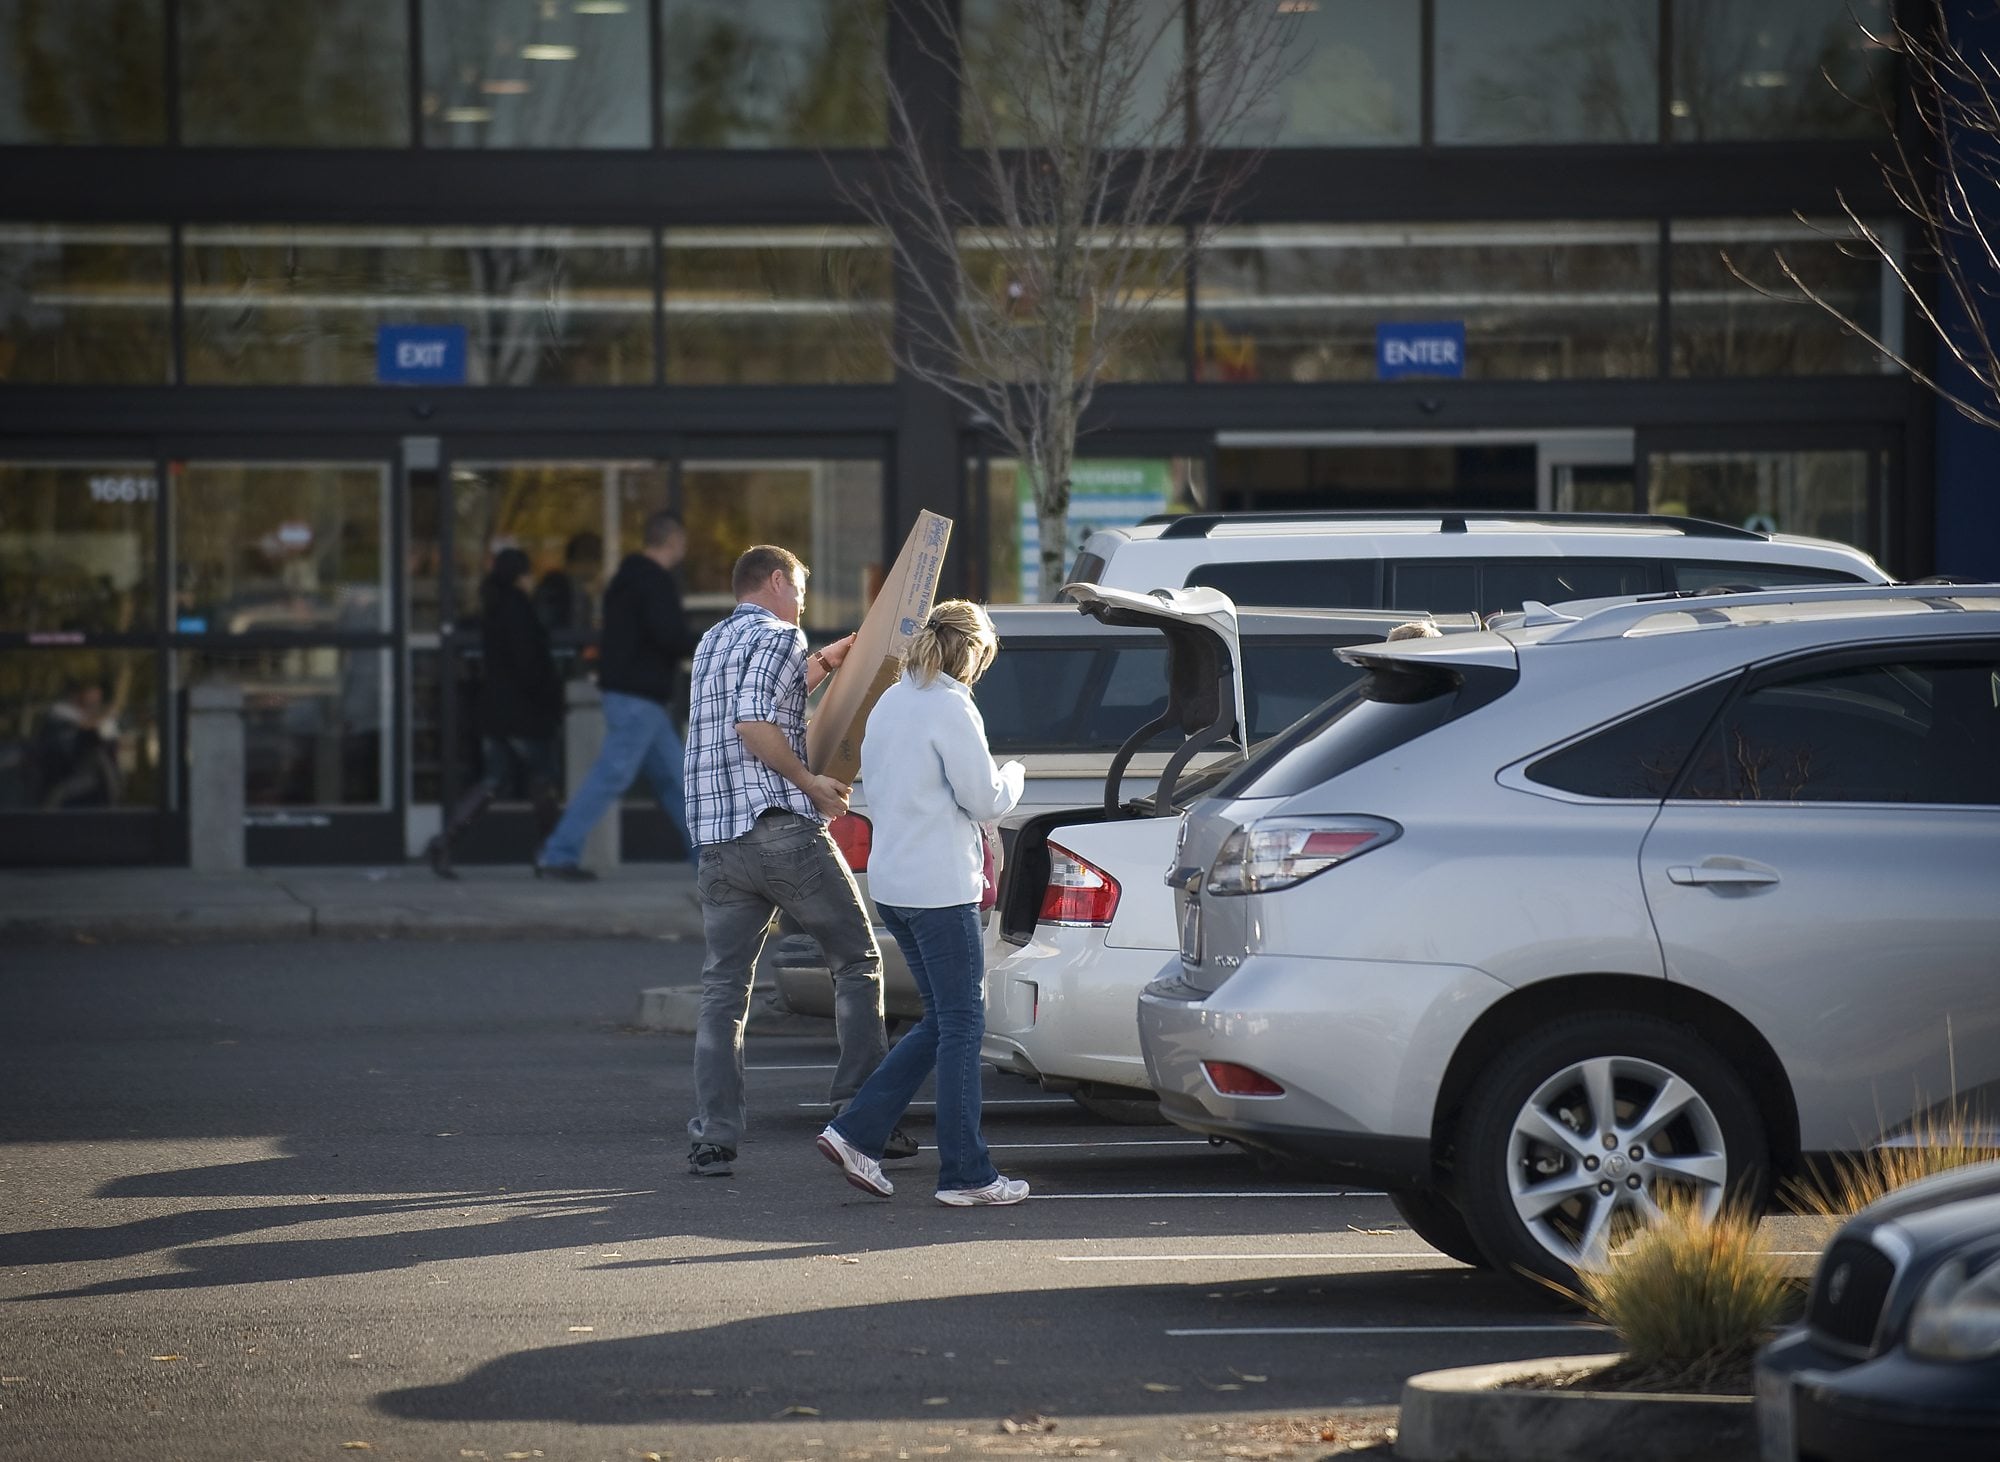 Shoppers load items into their car at Best Buy off of Southeast Mill Plain Boulevard earlier this week.